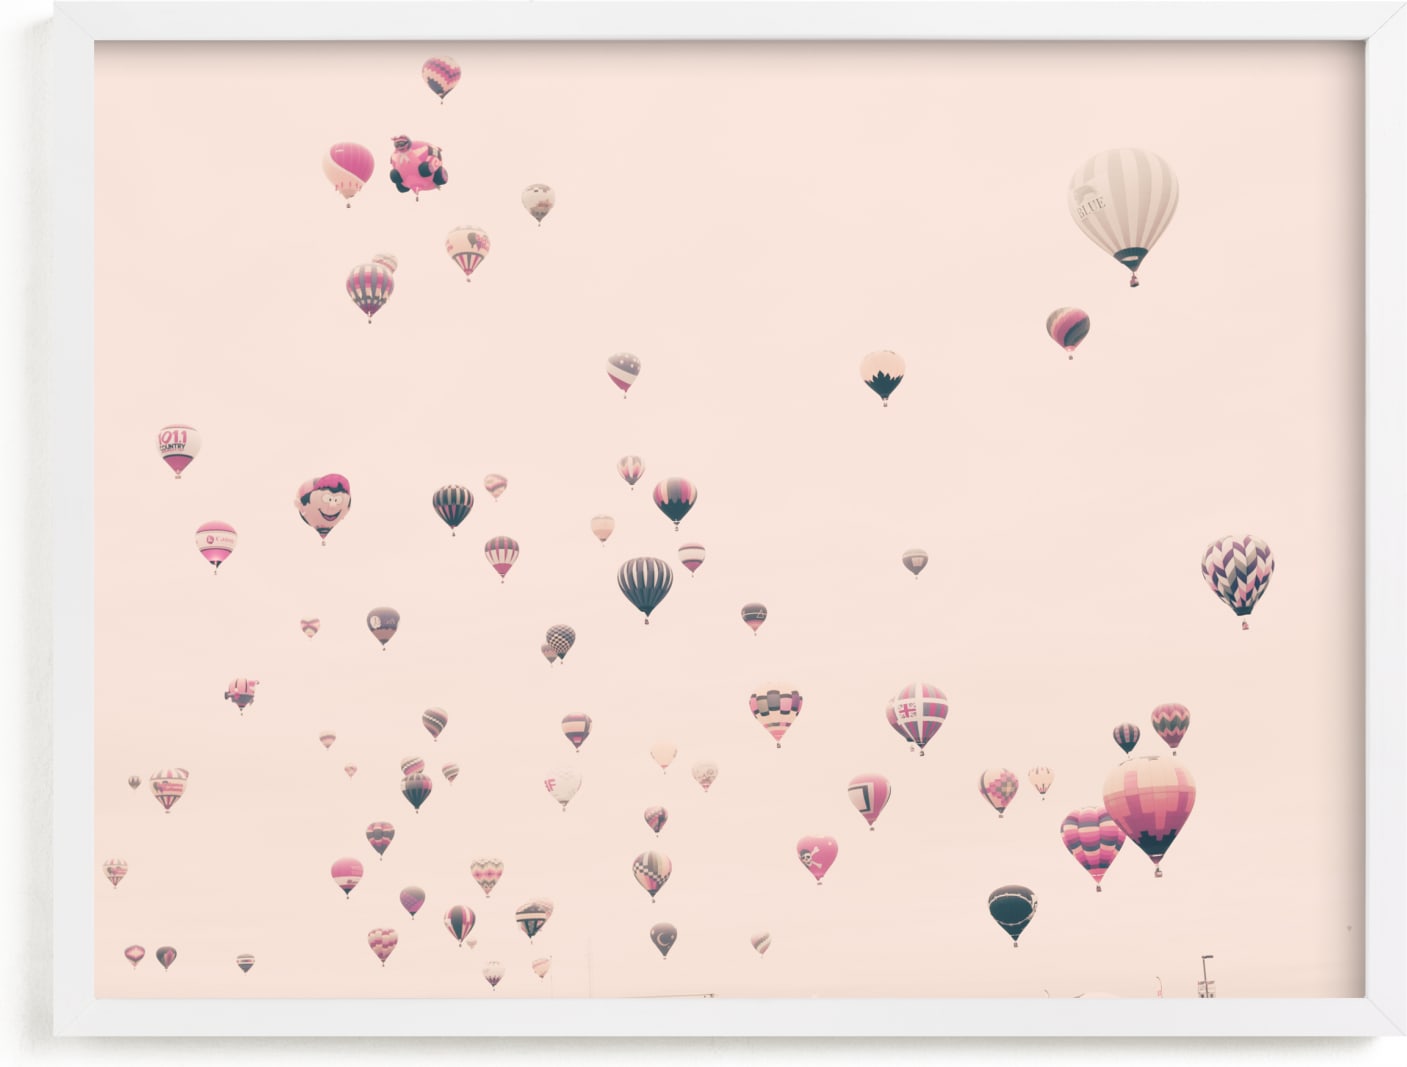 This is a pink kids wall art by Caroline Mint called Love is all around.